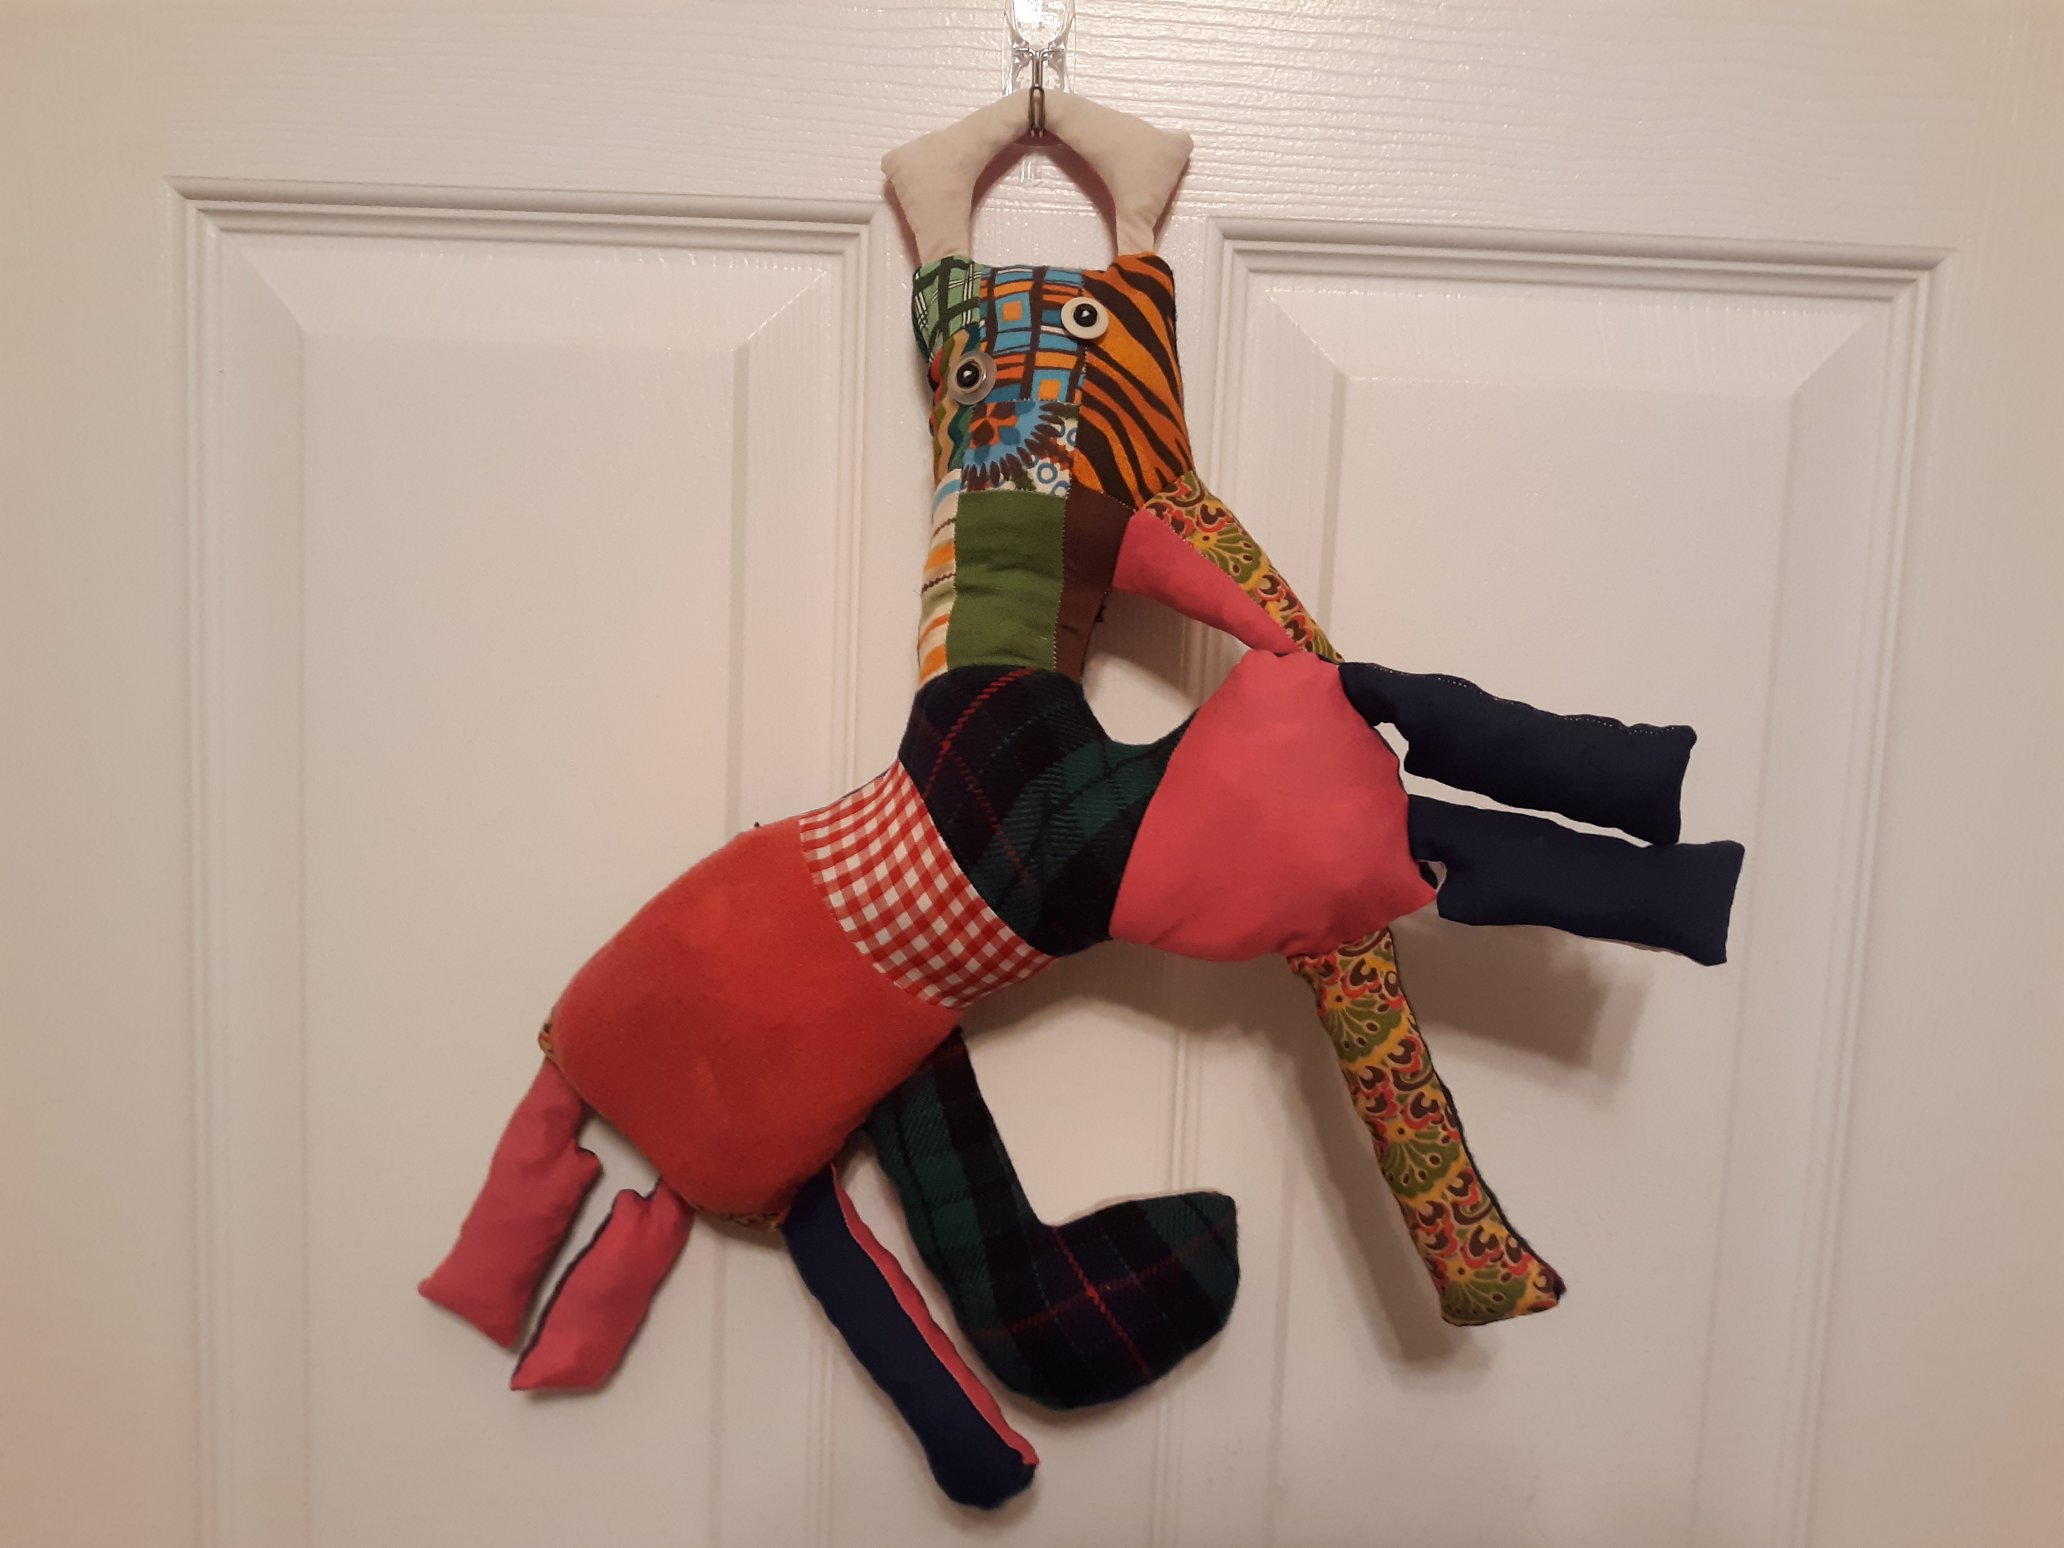 A patchwork doll hanging off of a hook that is attached to a door. The doll has a rectangular head with a triangular beak on the side of the head. There is a handle on the top of the head. The doll has two button eyes. The head comes out of the center of the wide body of the doll. There are two legs popping out horizontally of the butt of the doll with two more legs vertically coming out of the bottom. At the front of the doll's body are three more legs. One leg is coming out vertically from the bottom and two legs are coming out horizontally from the side.